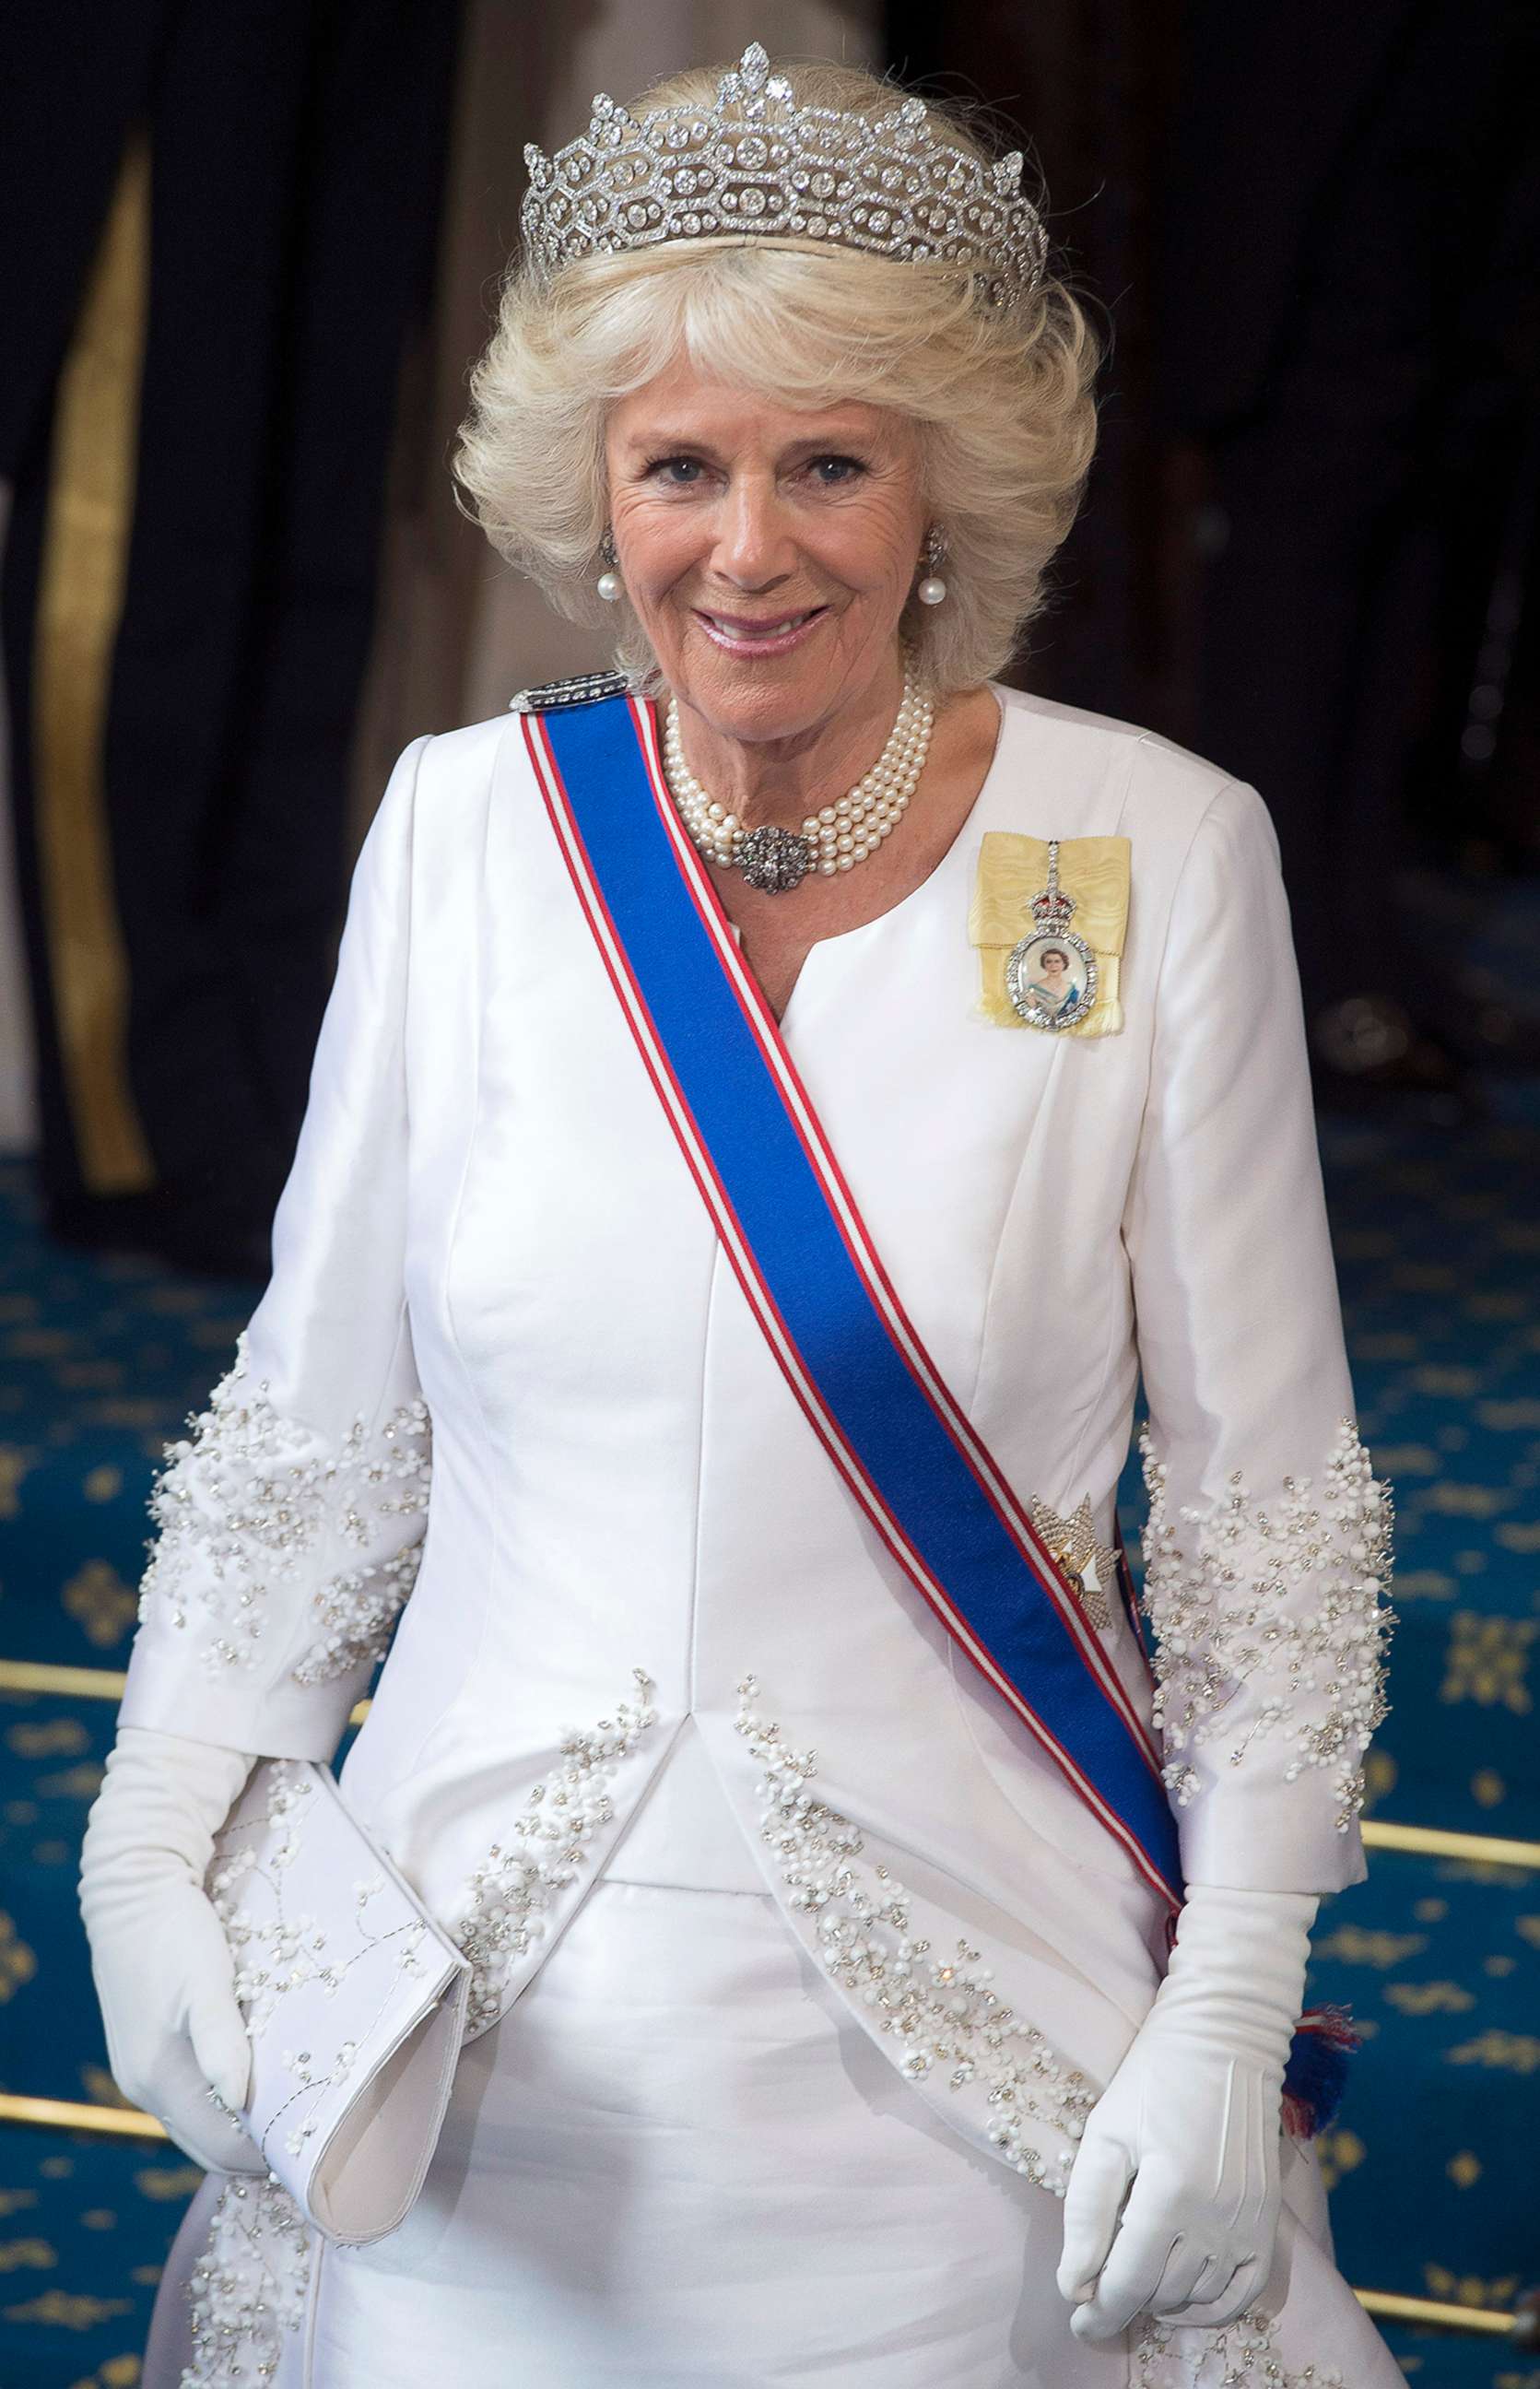 PHOTO: Camilla, Duchess of Cornwall arrives at The State Opening of Parliament, May 18, 2016, in London.